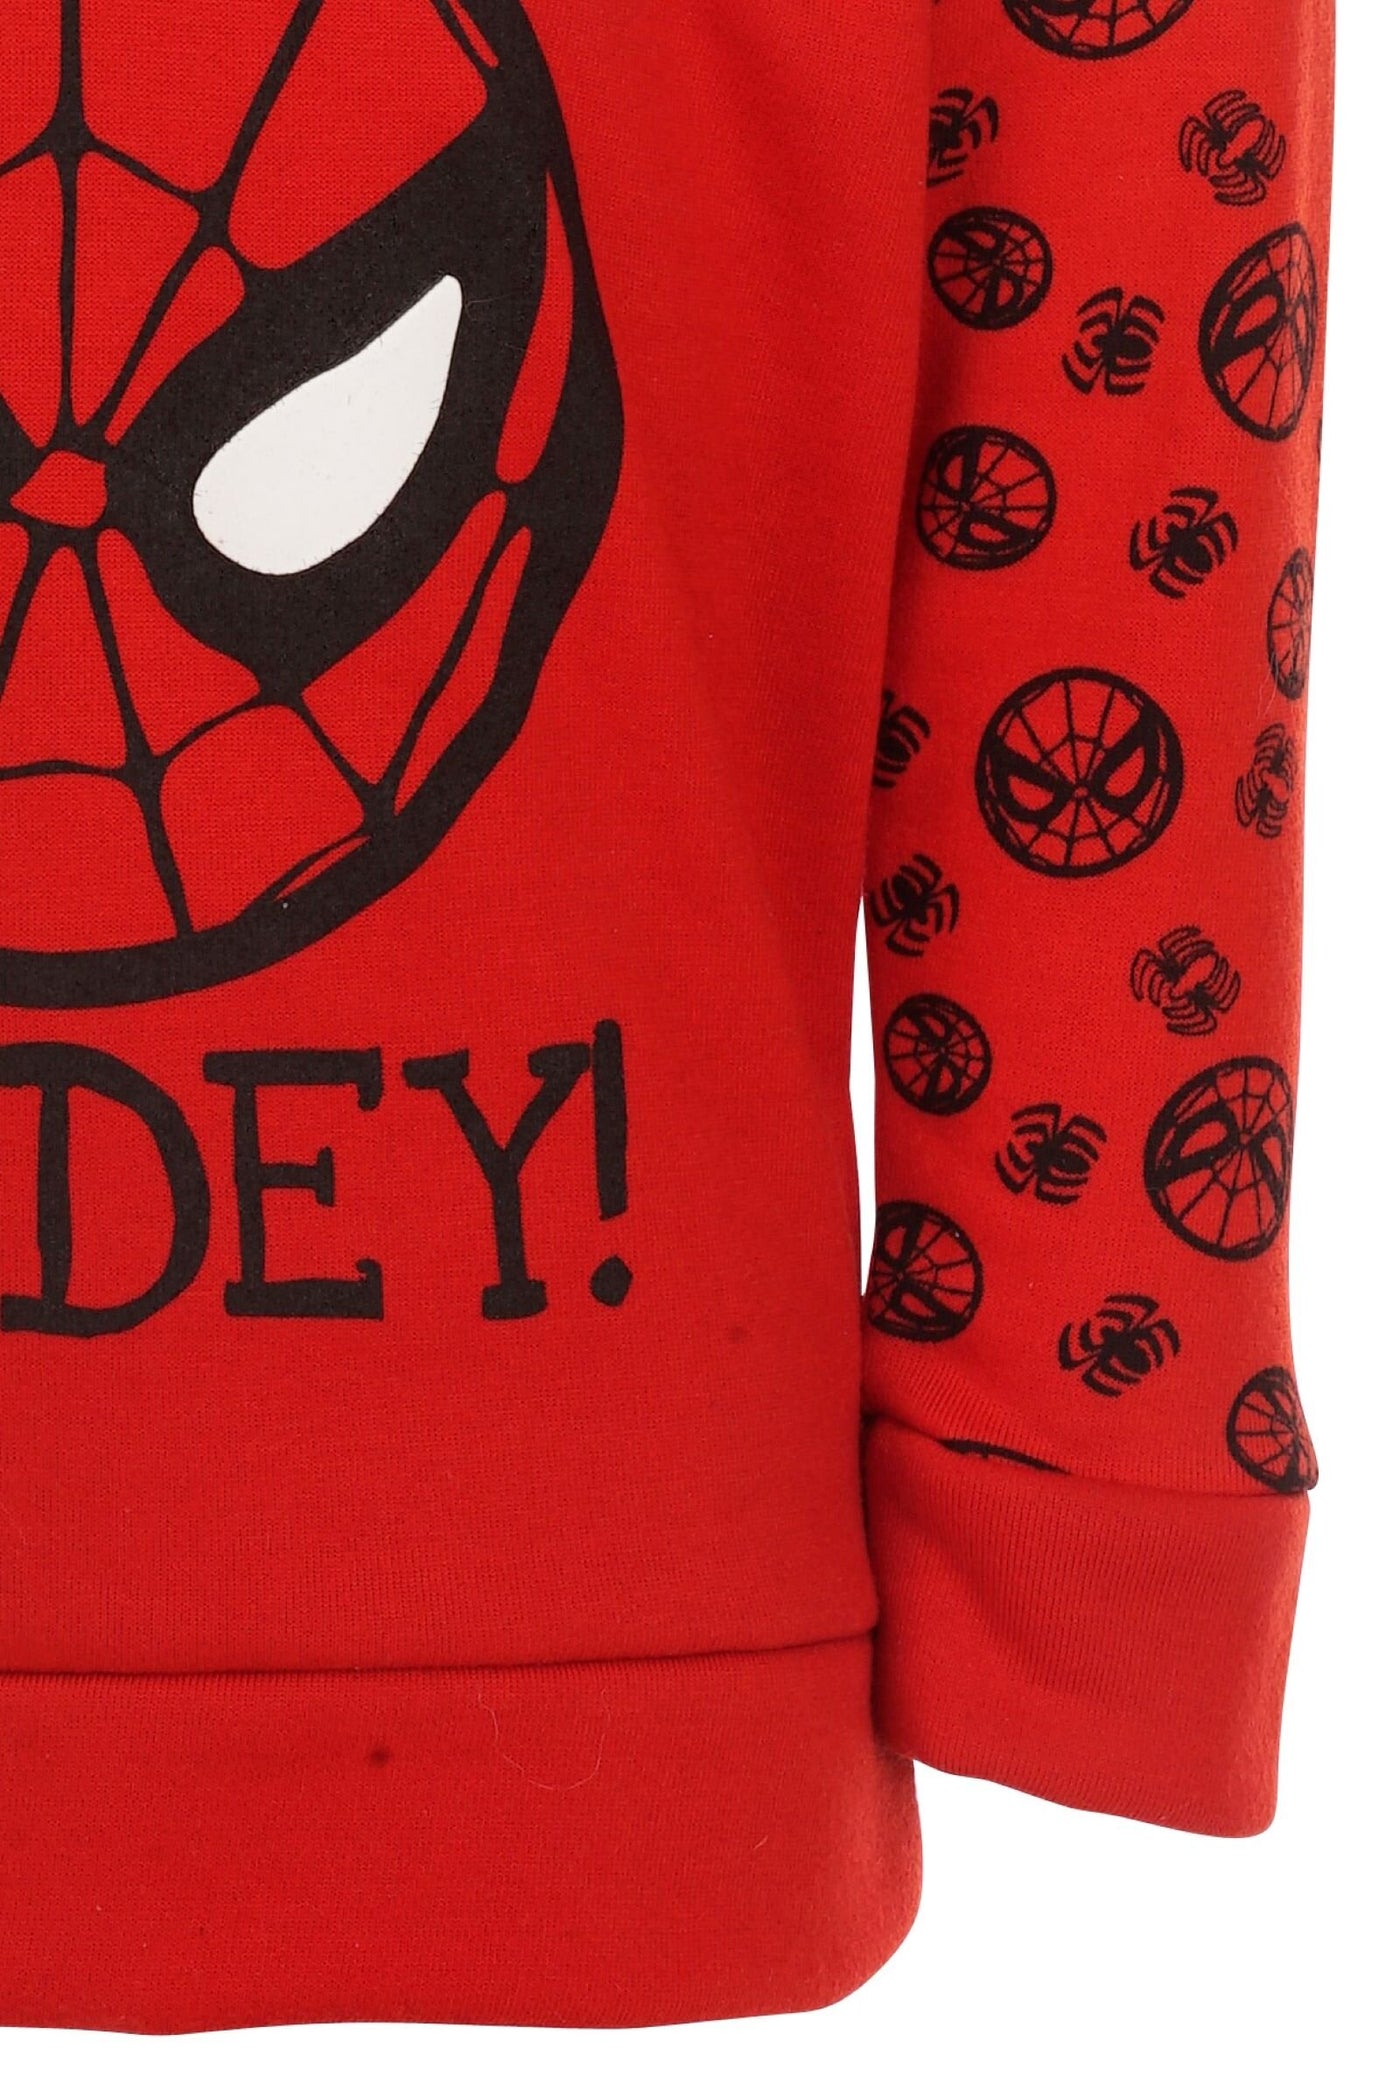 Marvel Avengers Spider-Man Fleece Pullover Hoodie and Jogger Pants Outfit Set